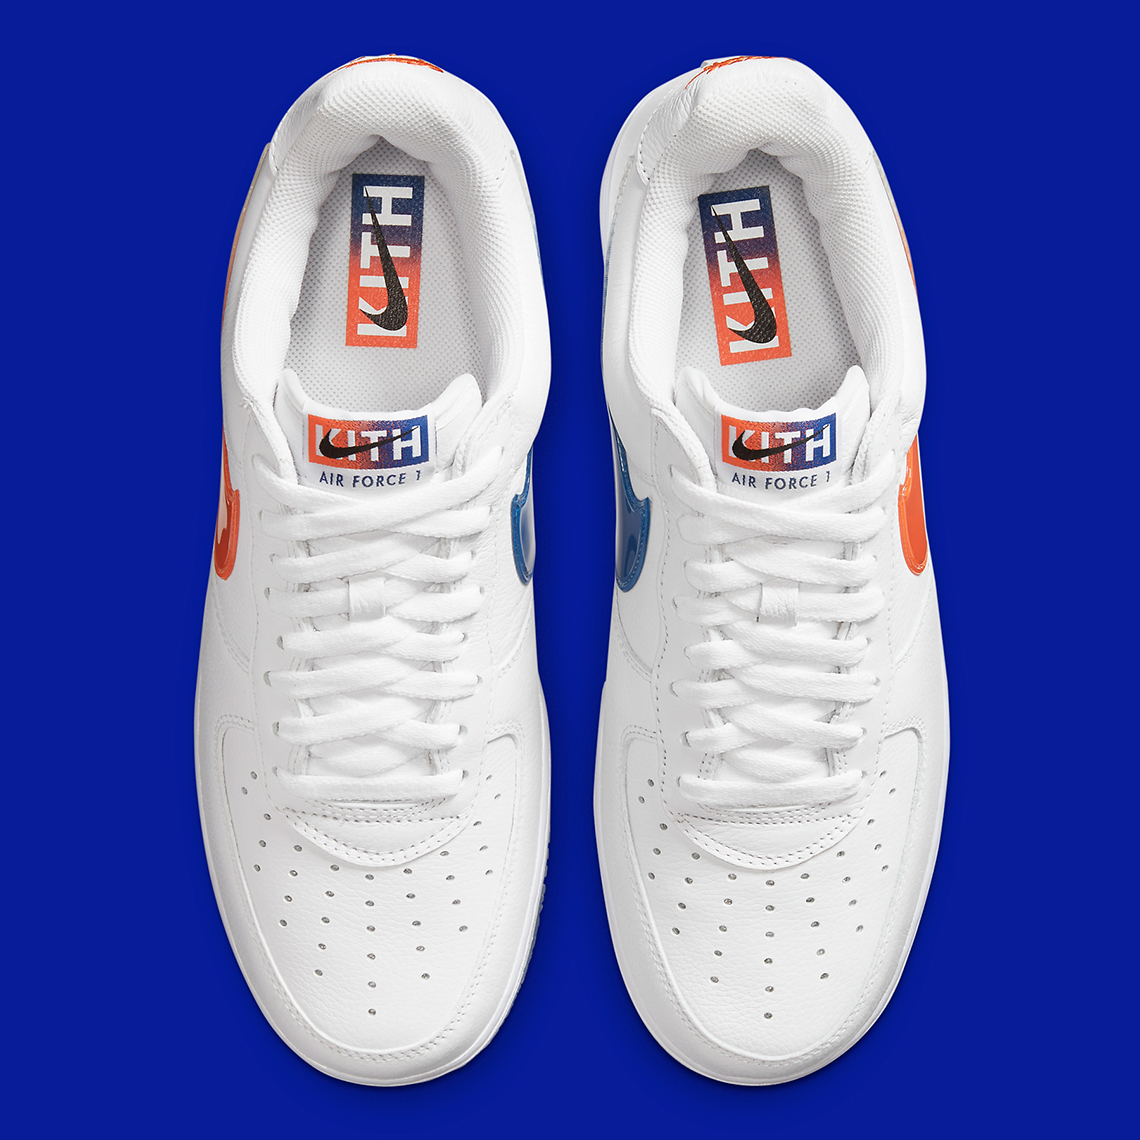 KITH Nike New York Knicks Collection Release Date